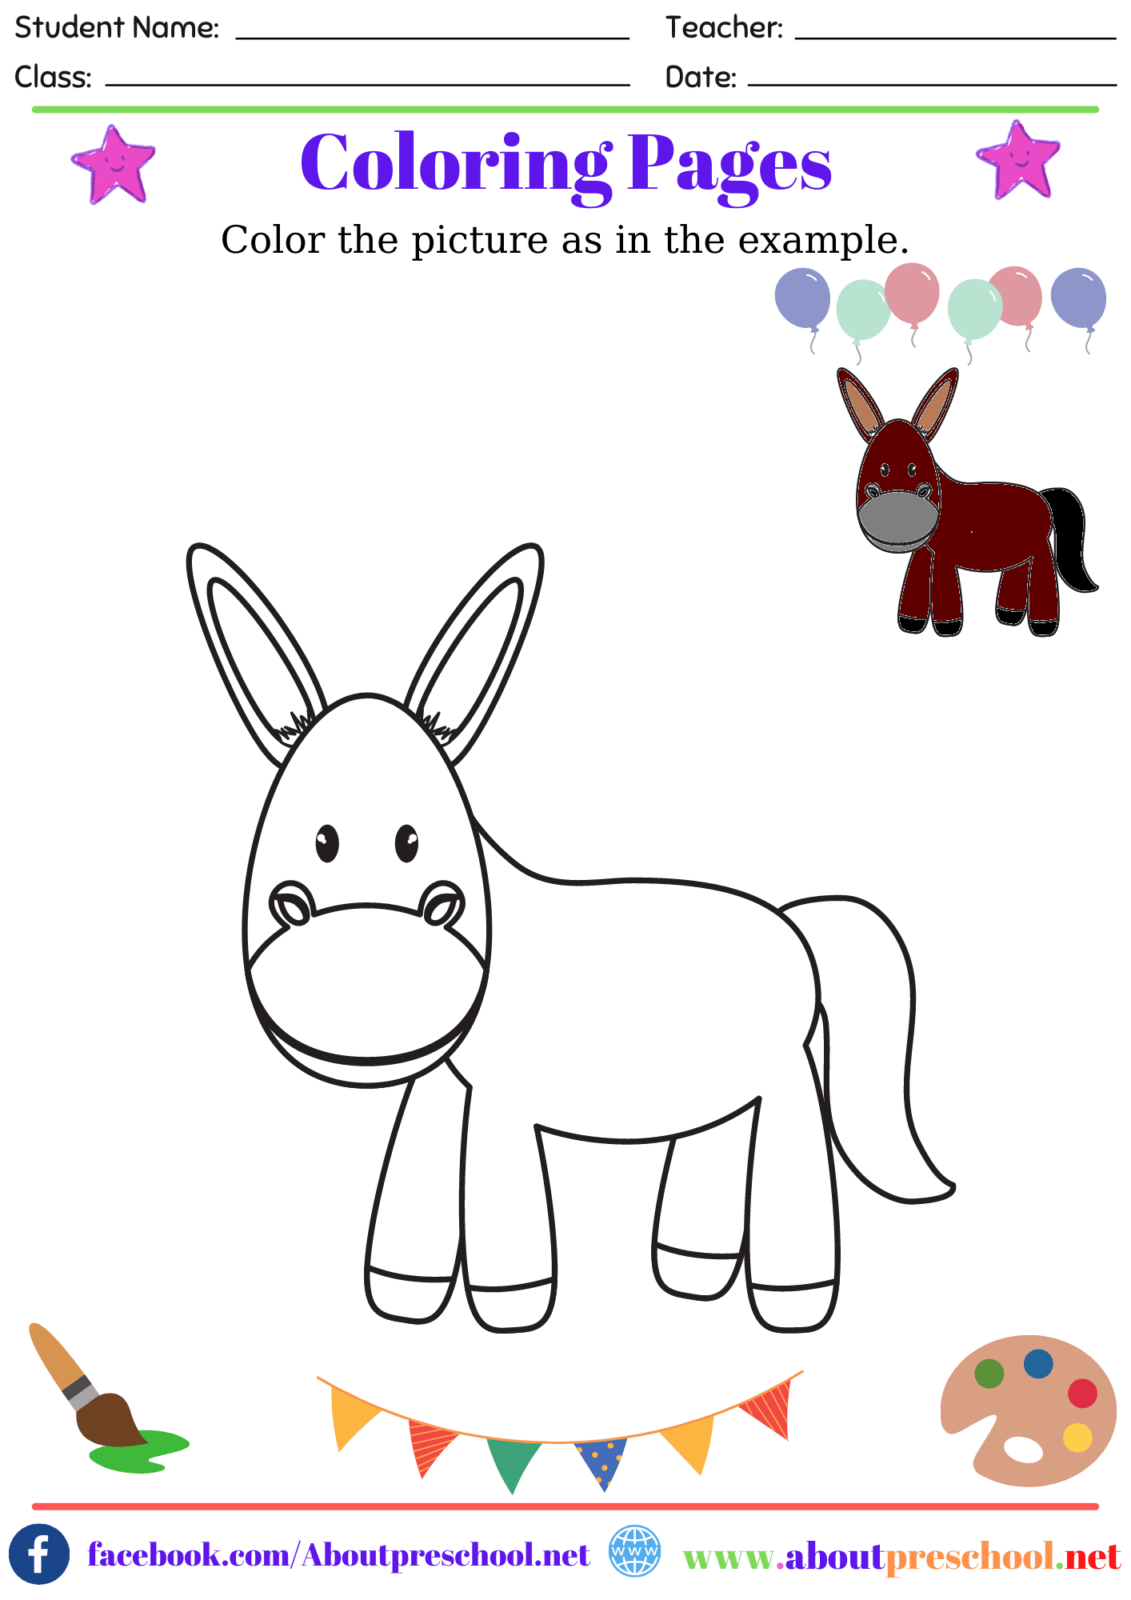 Coloring Pages 15